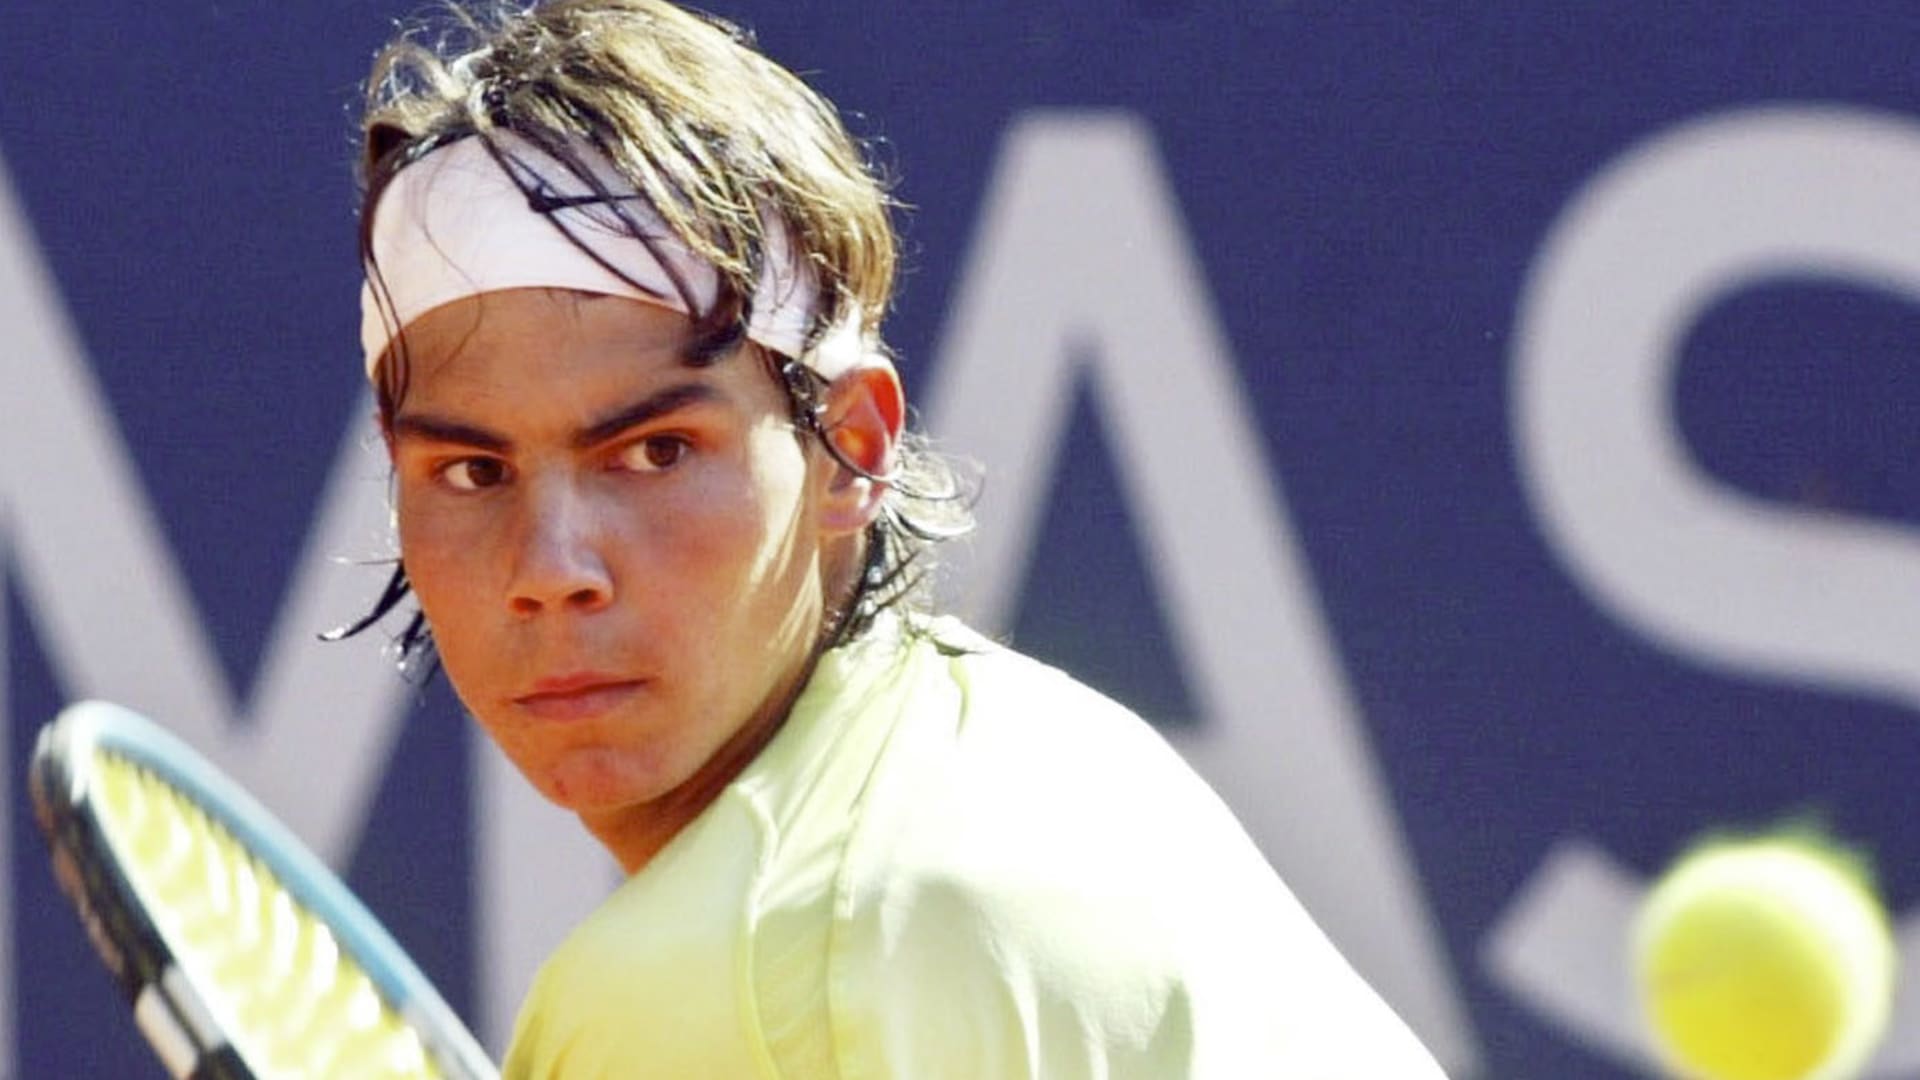 Rafael Nadal played (and won) his first ATP match on this day 20 years ago